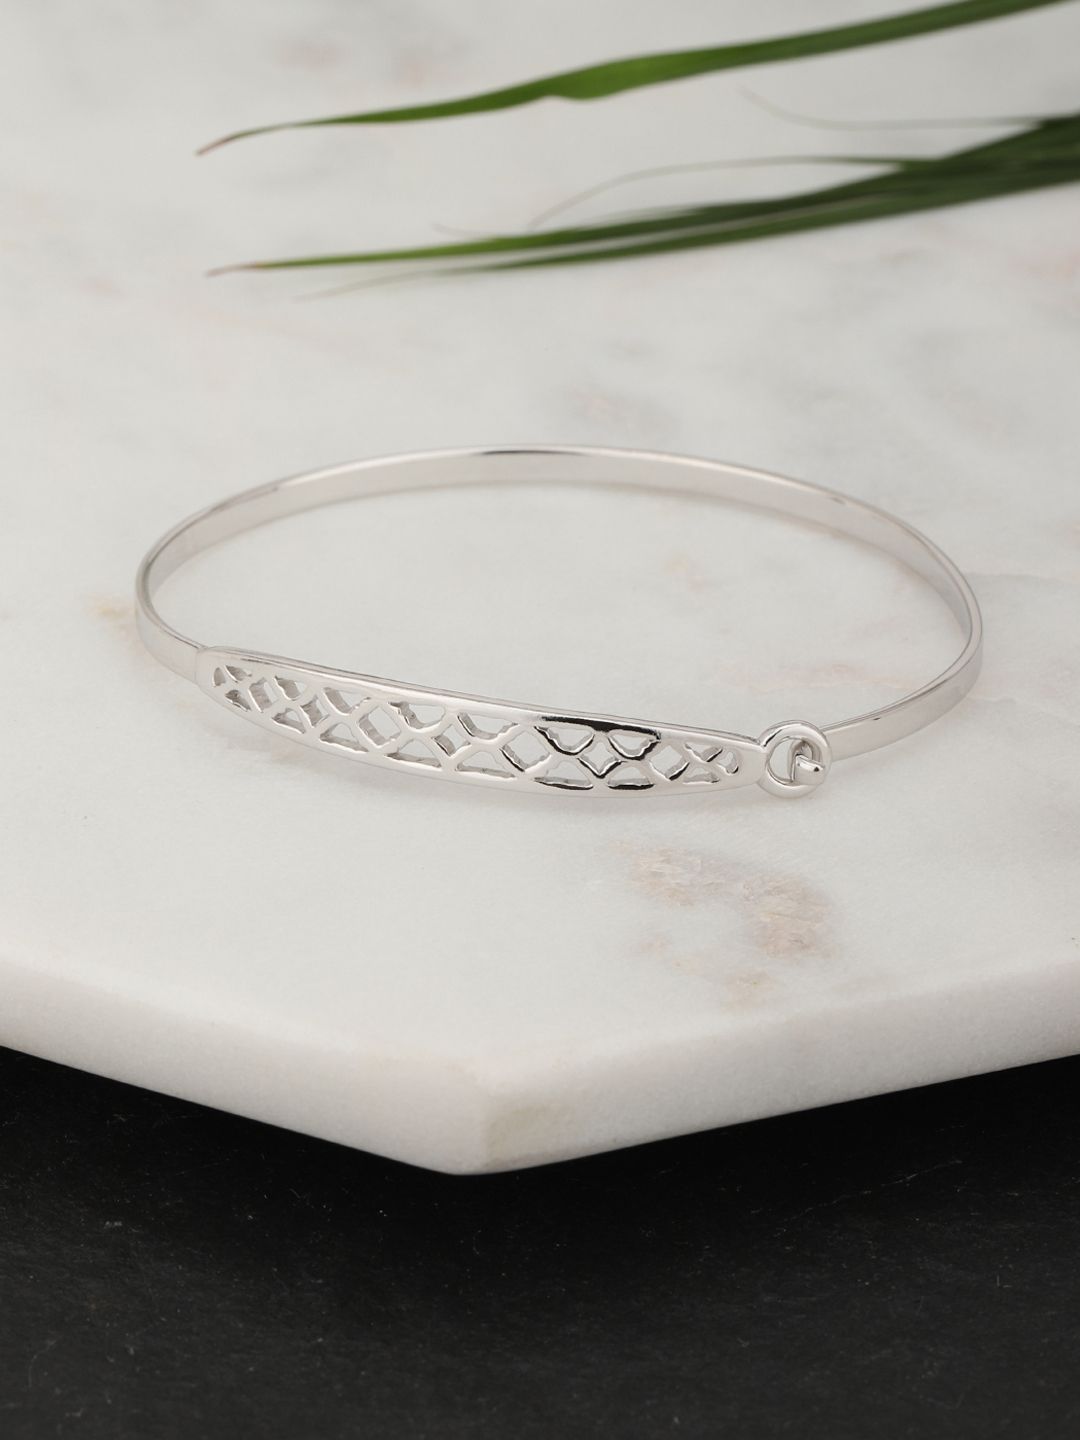 Carlton London Silver-Toned Rhodium-Plated Criss-Cross Cut-Out Bangle-Style Bracelet Price in India